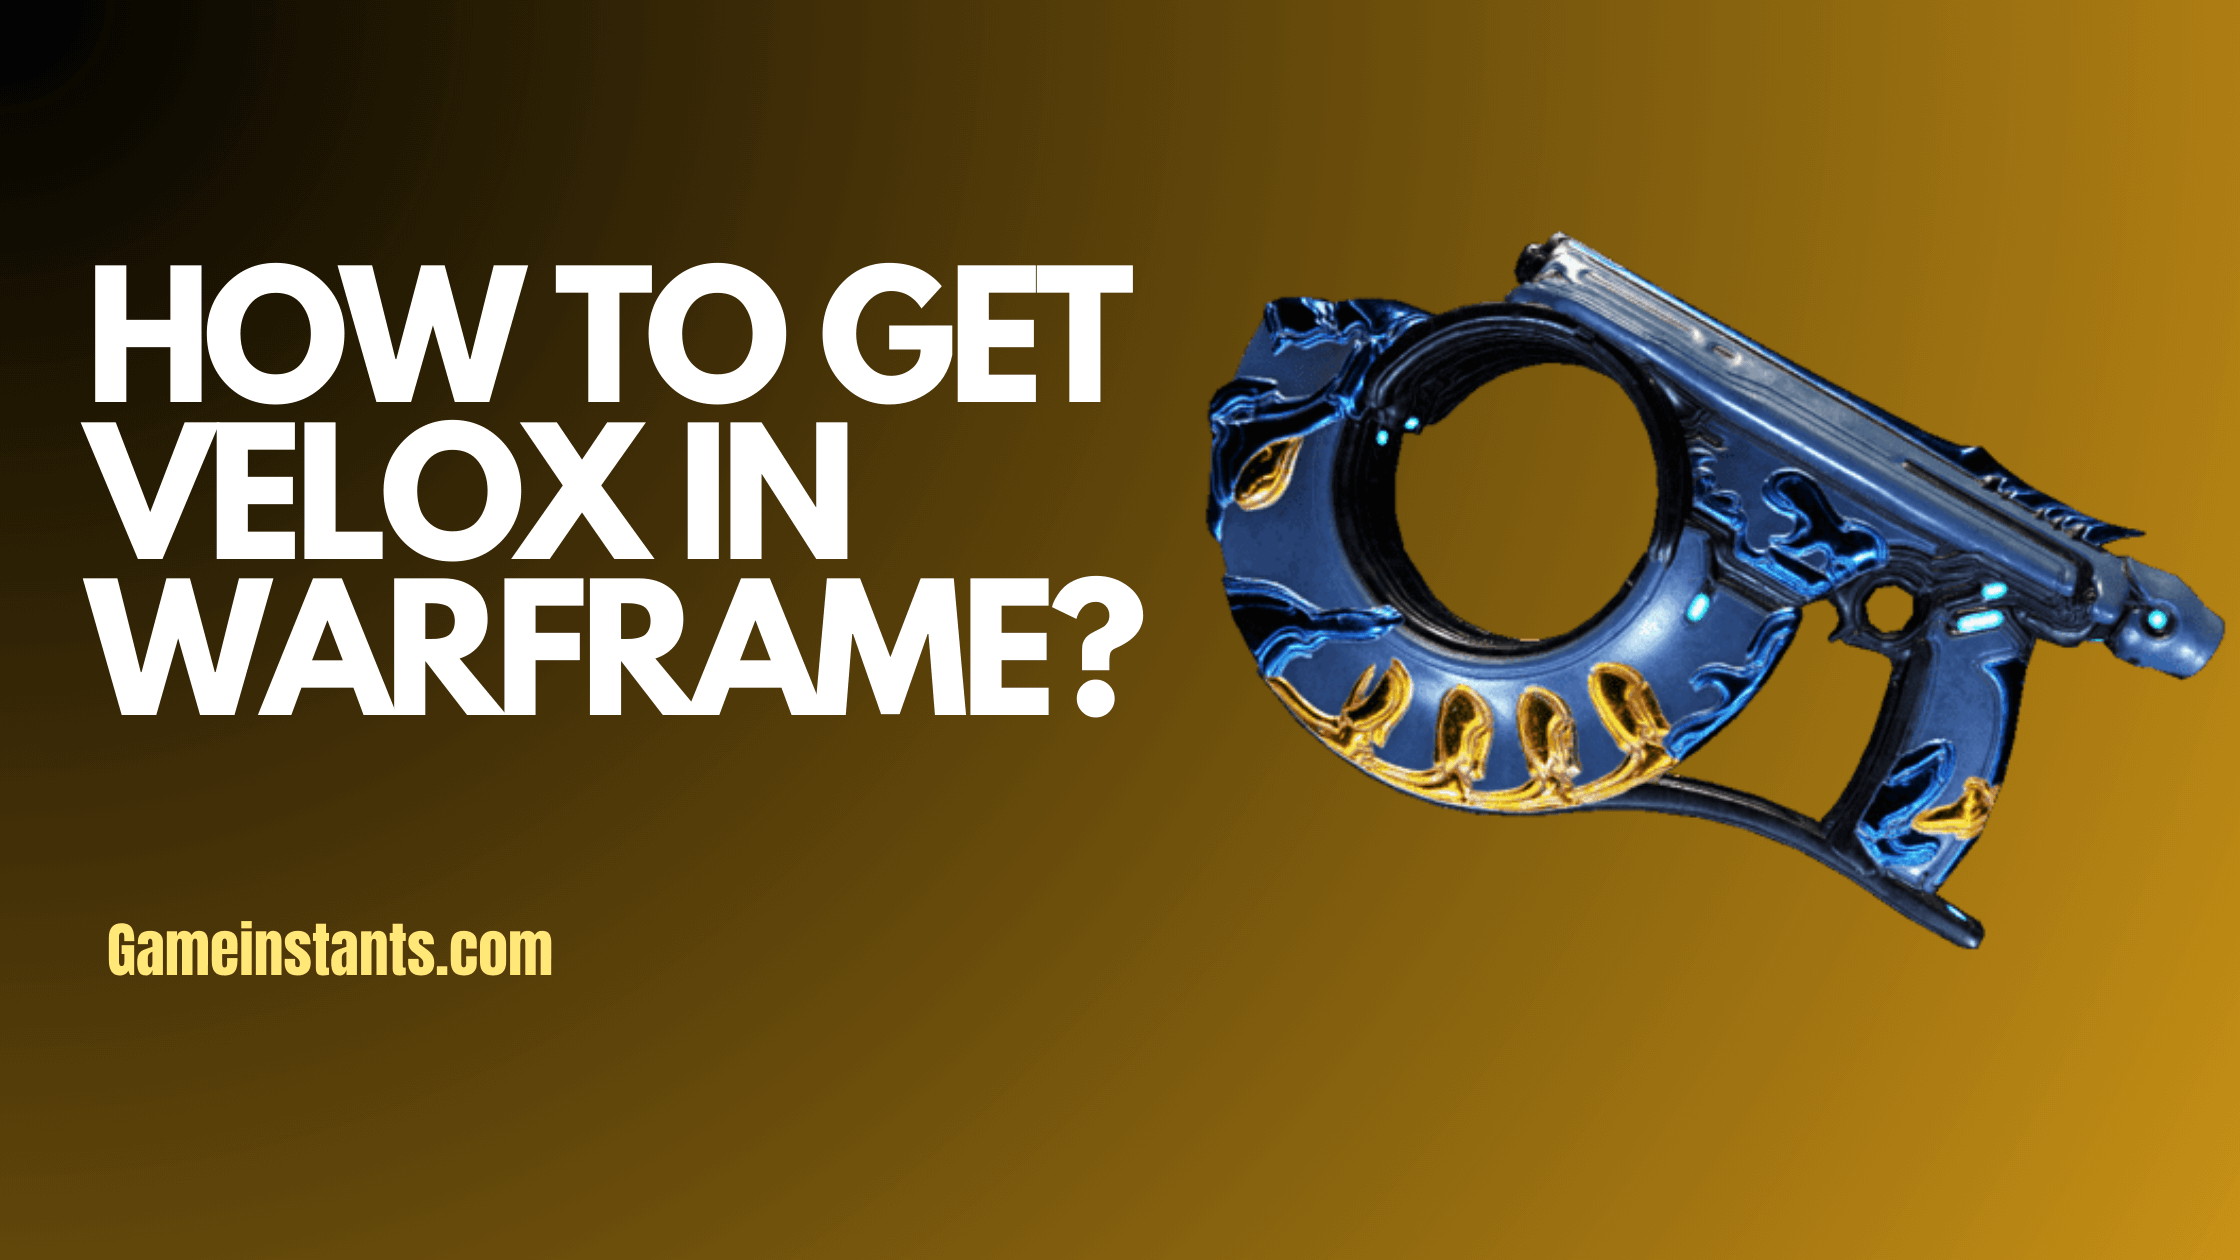 How To Get Velox In Warframe